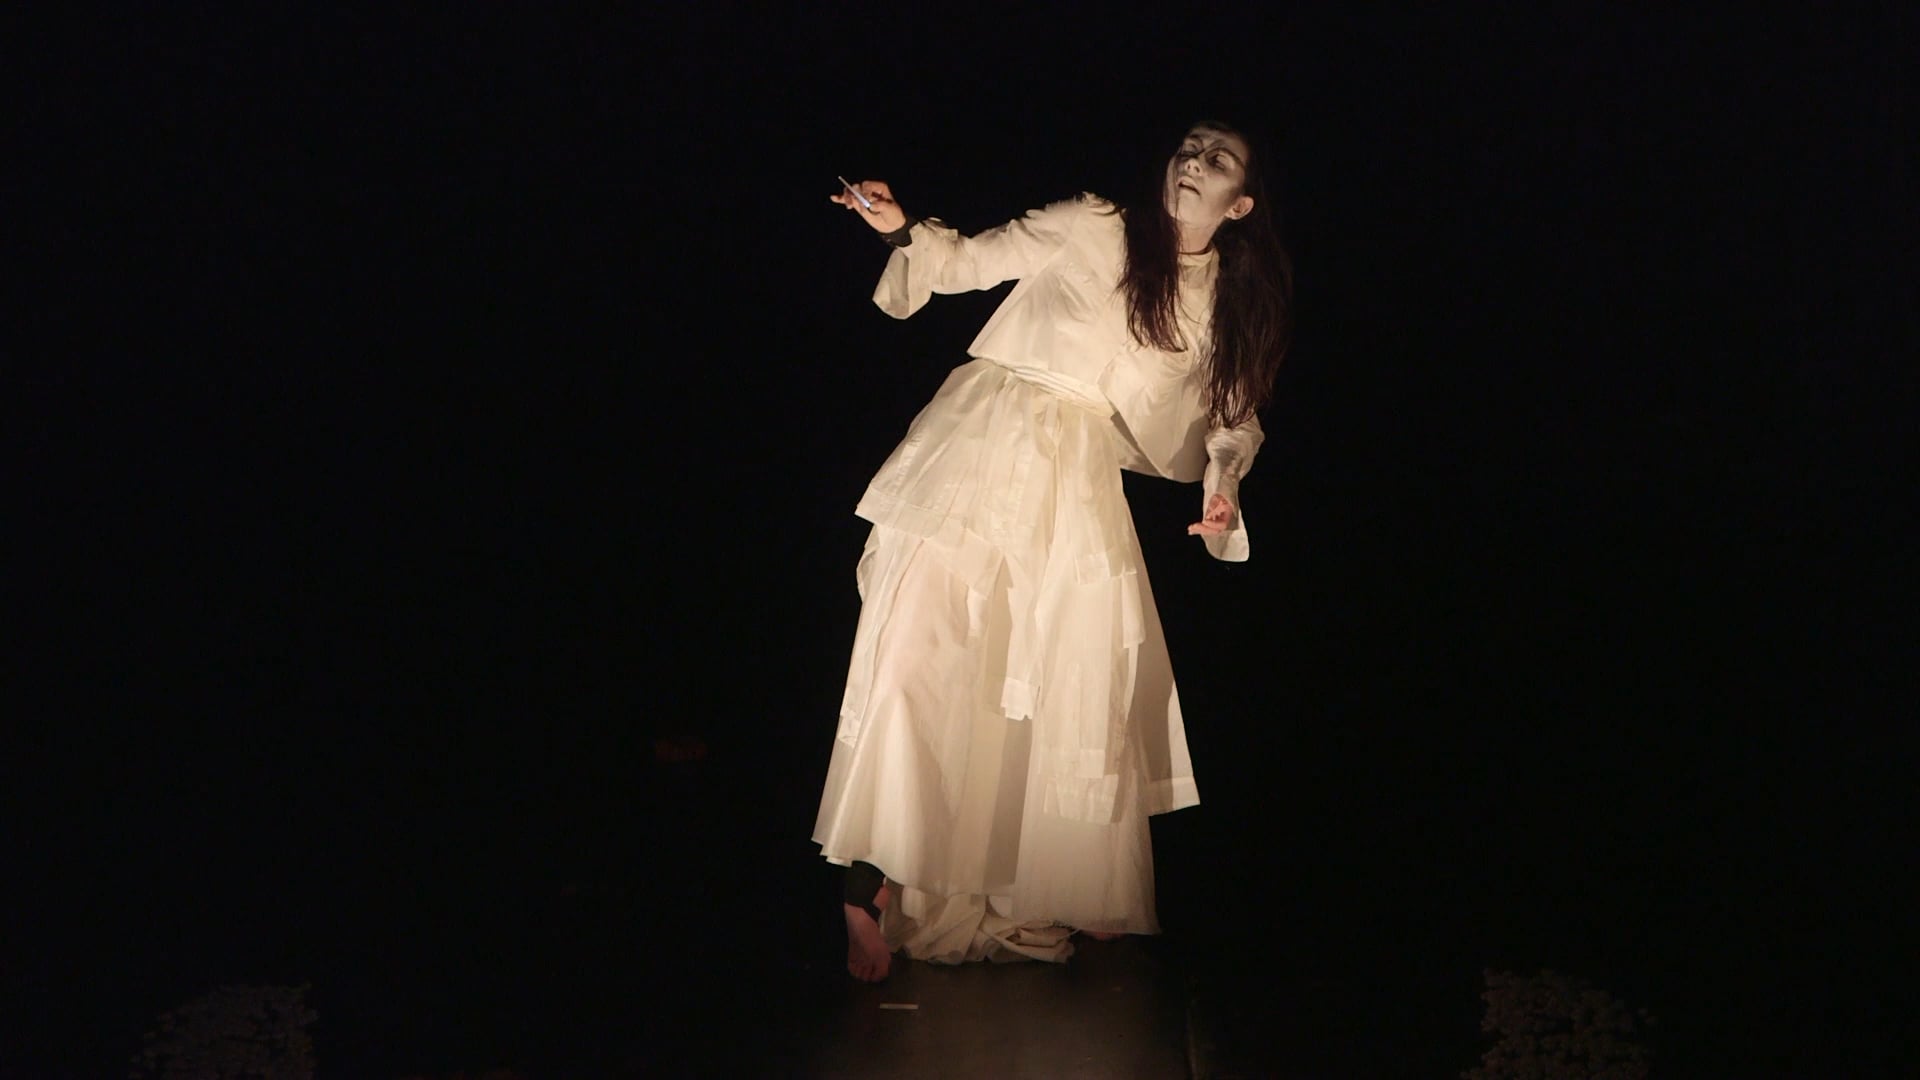 Butoh Beethoven Eclipse with Vangeline - No sound on Vimeo